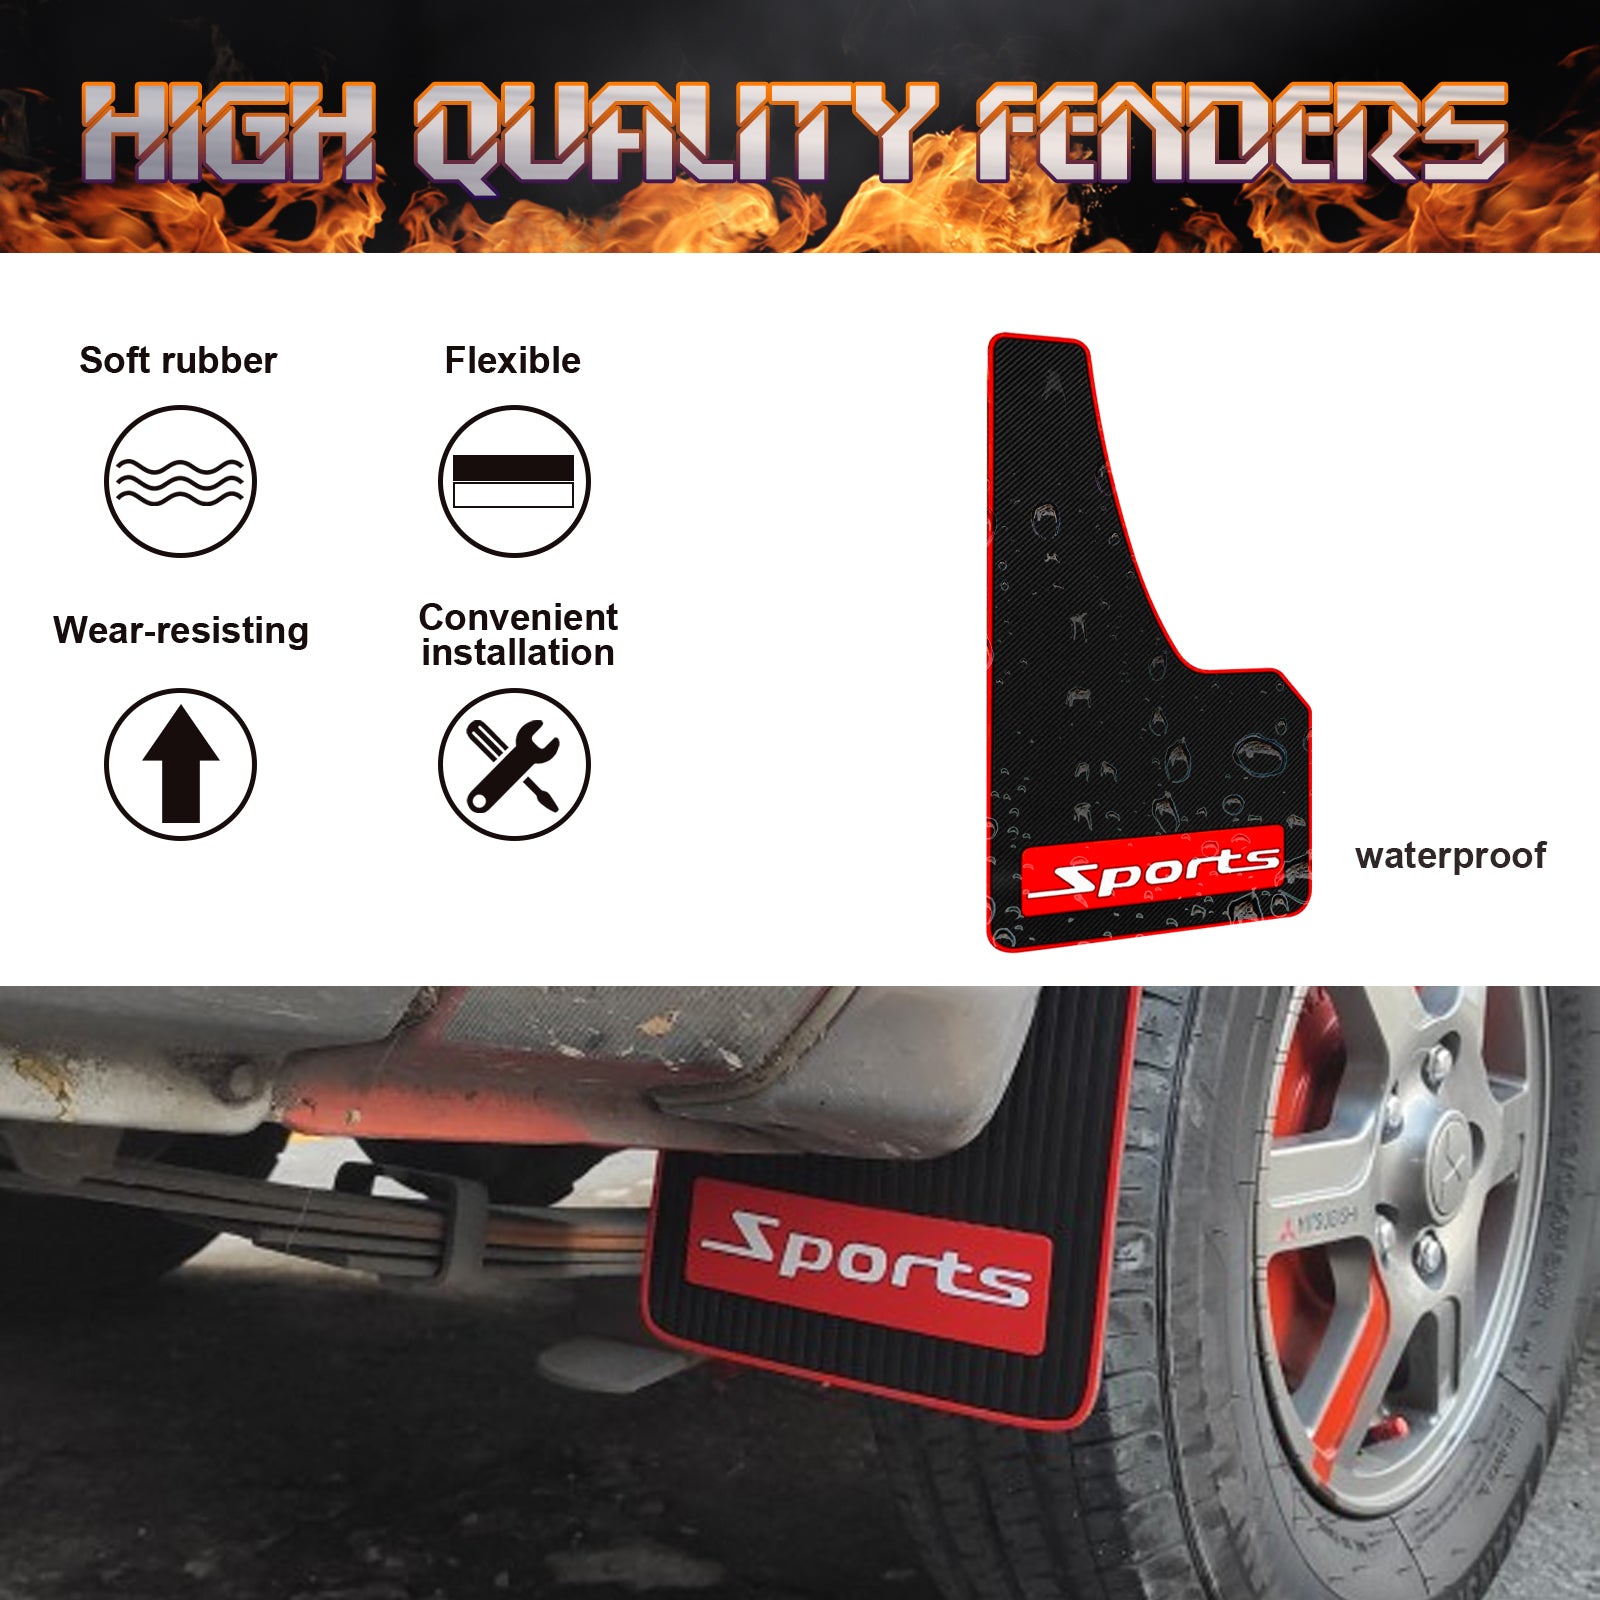  4PCS Car Mud Flaps,No Drilling Required Splash Guards Bendable  Mud Guard for Car,Universal Mud Flaps for Trucks Protects Front & Rear  Wheel Automotive Exterior Accessories : Automotive